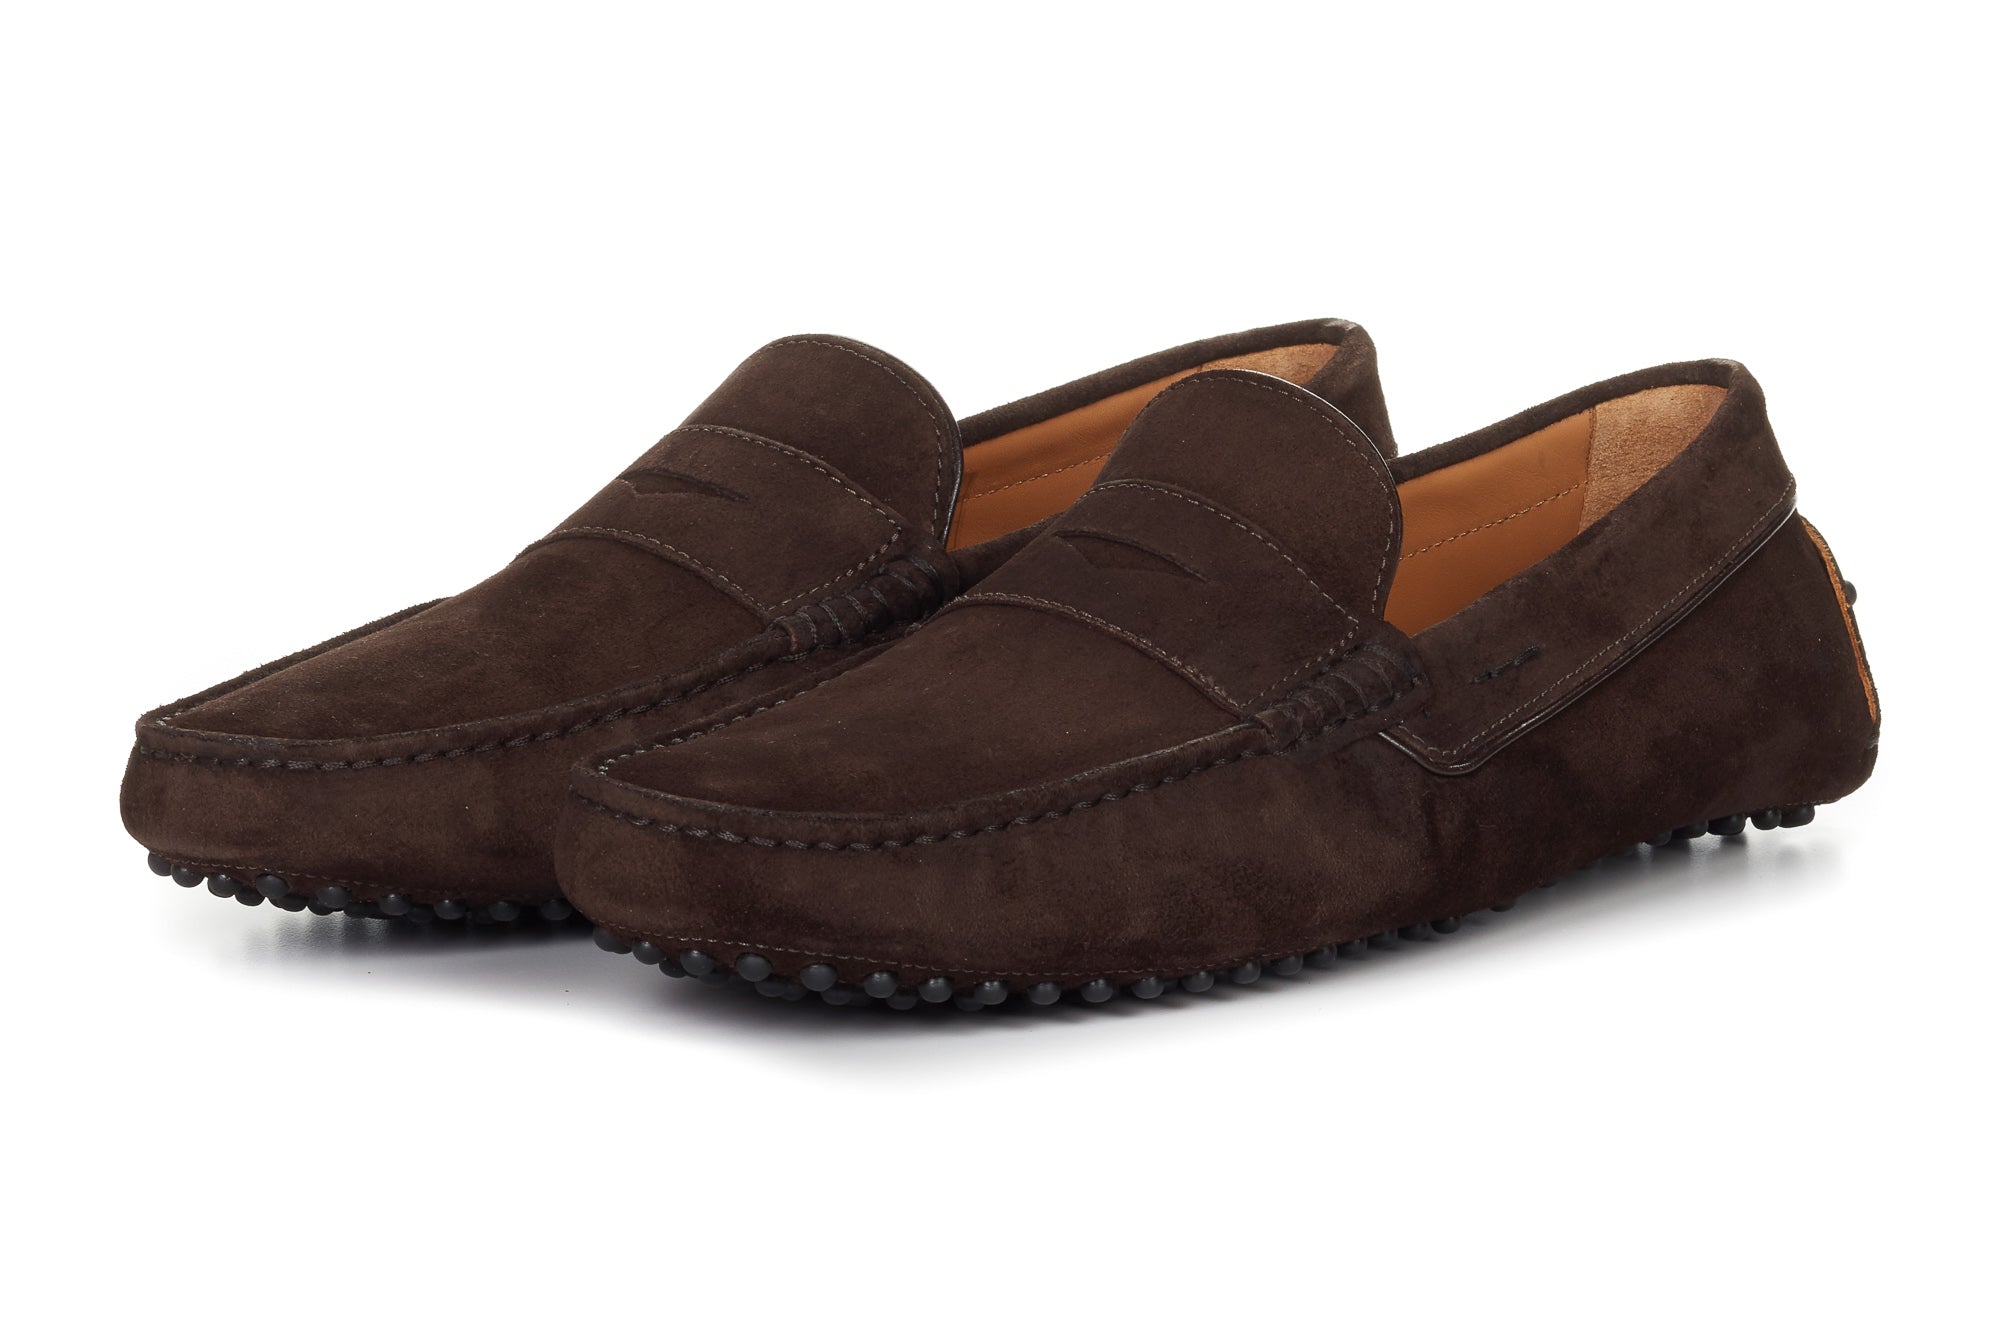 The McQueen Driving Loafer - Chocolate Suede